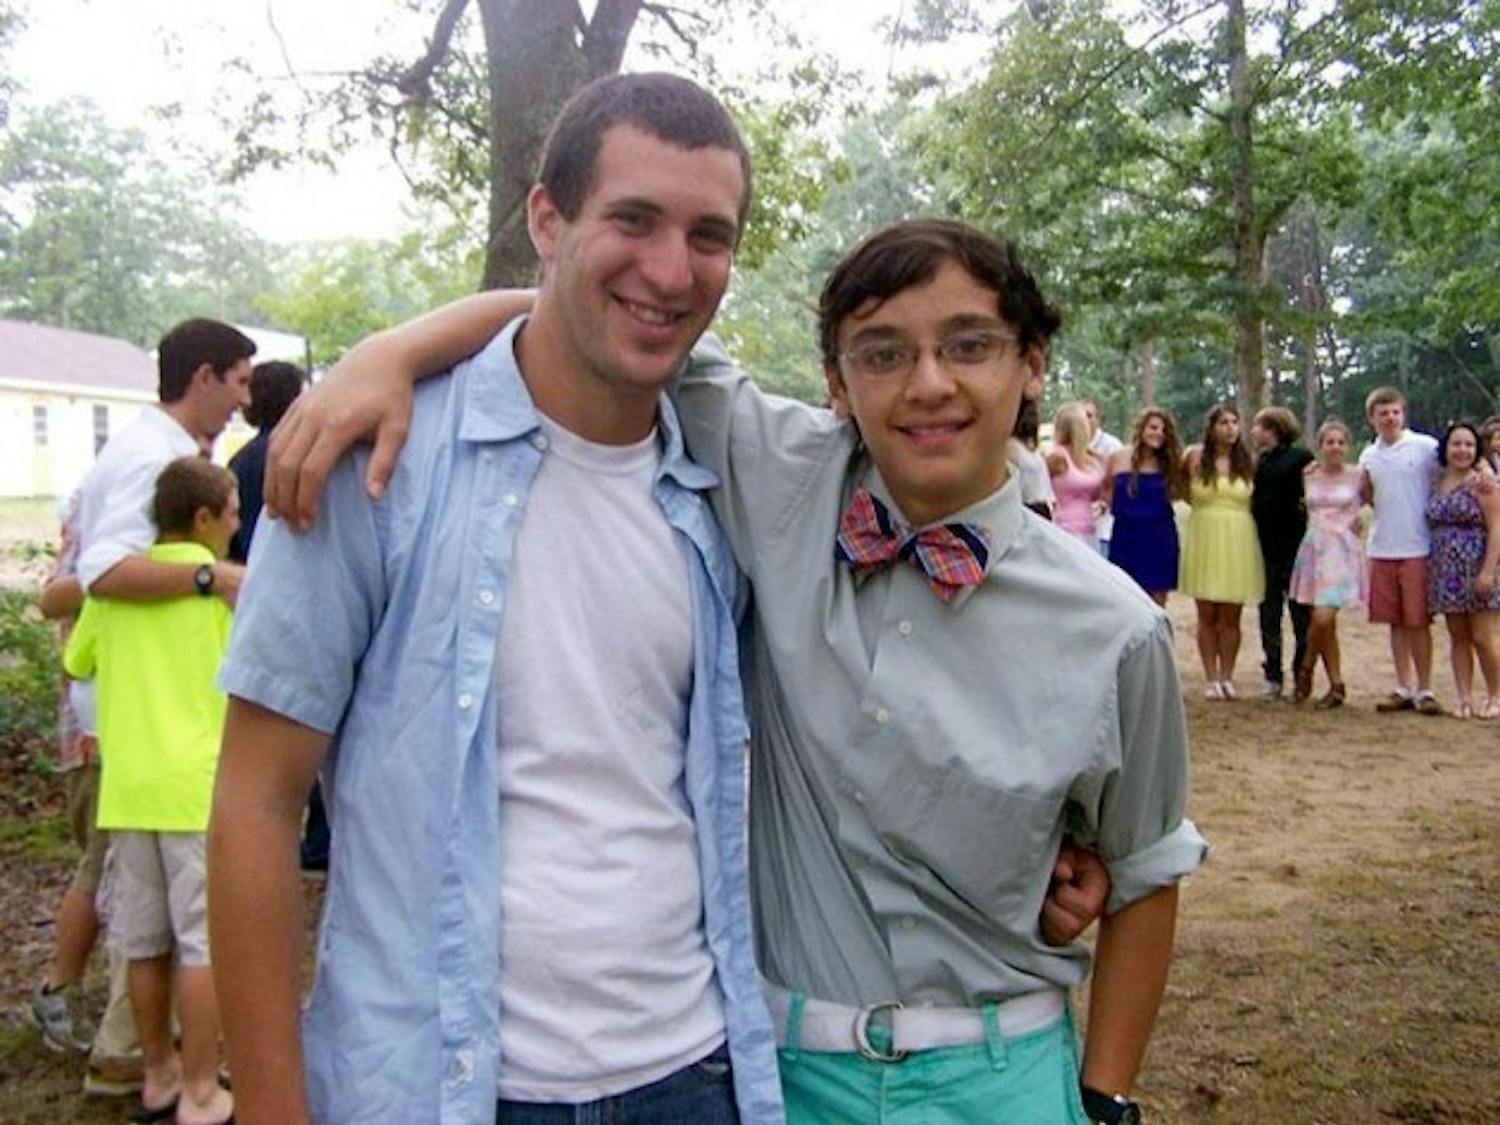 Steven Kahn, a sophomore chemistry major, with one of his campers at the summer camp where he works in Rhode Island. Though Kahn feels fortunate to have a summer job, he wishes he was able to secure an internship in his desired professional field.